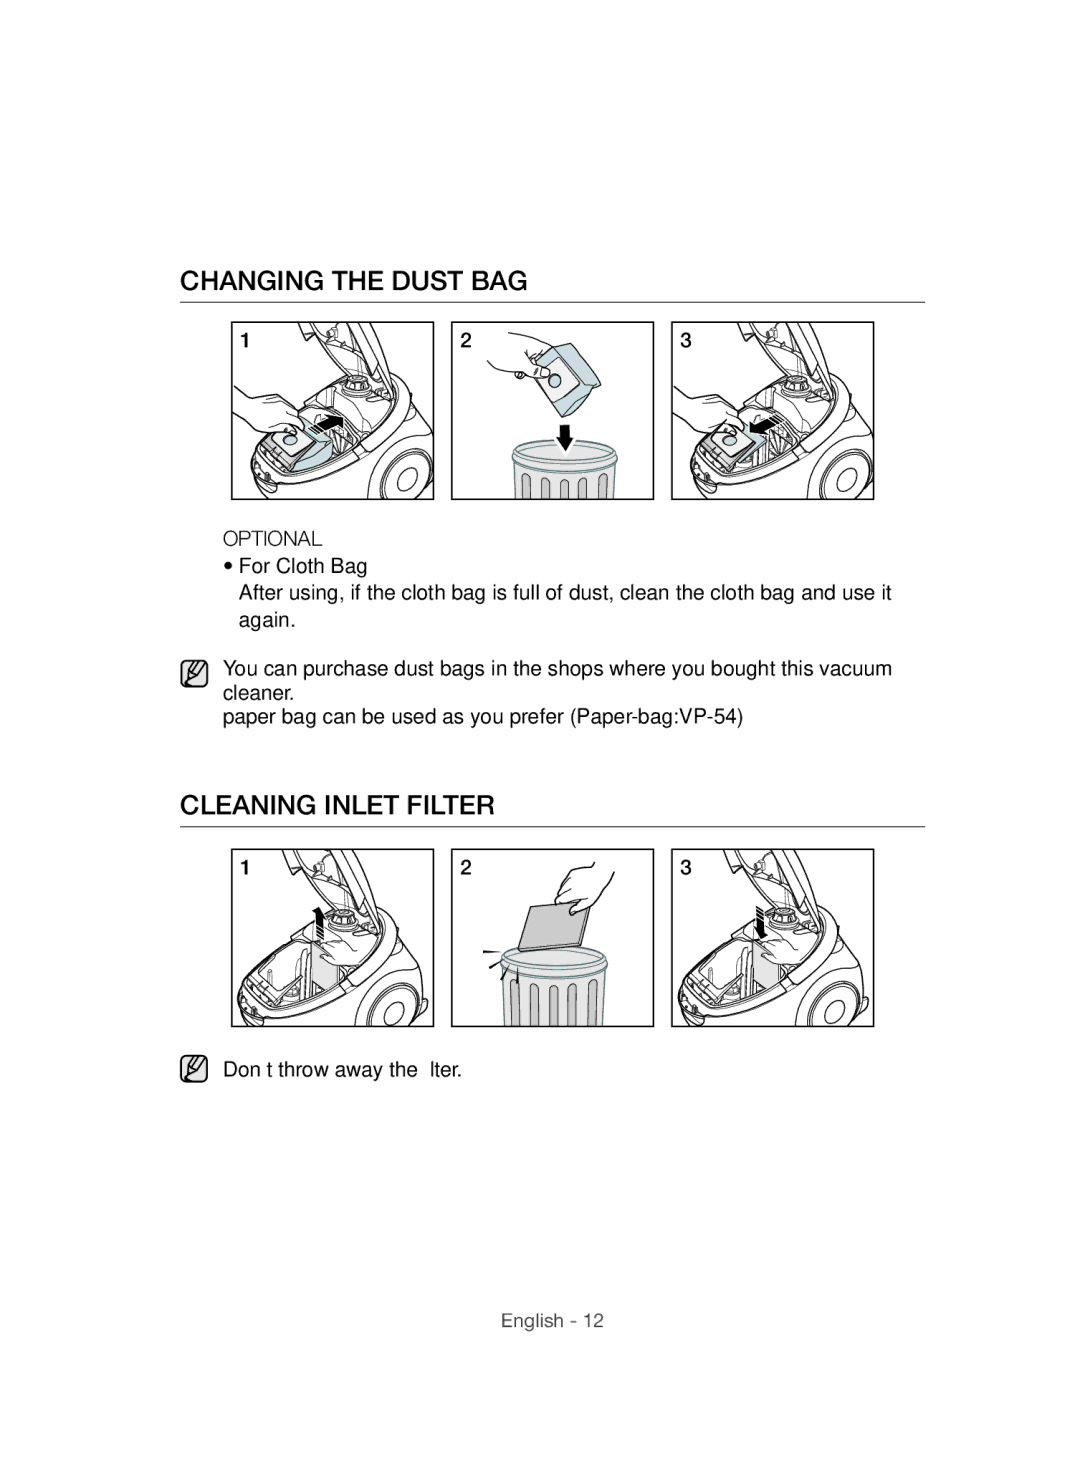 Samsung VCC54F0V3R/XTR manual Changing the Dust BAG, Cleaning Inlet Filter 